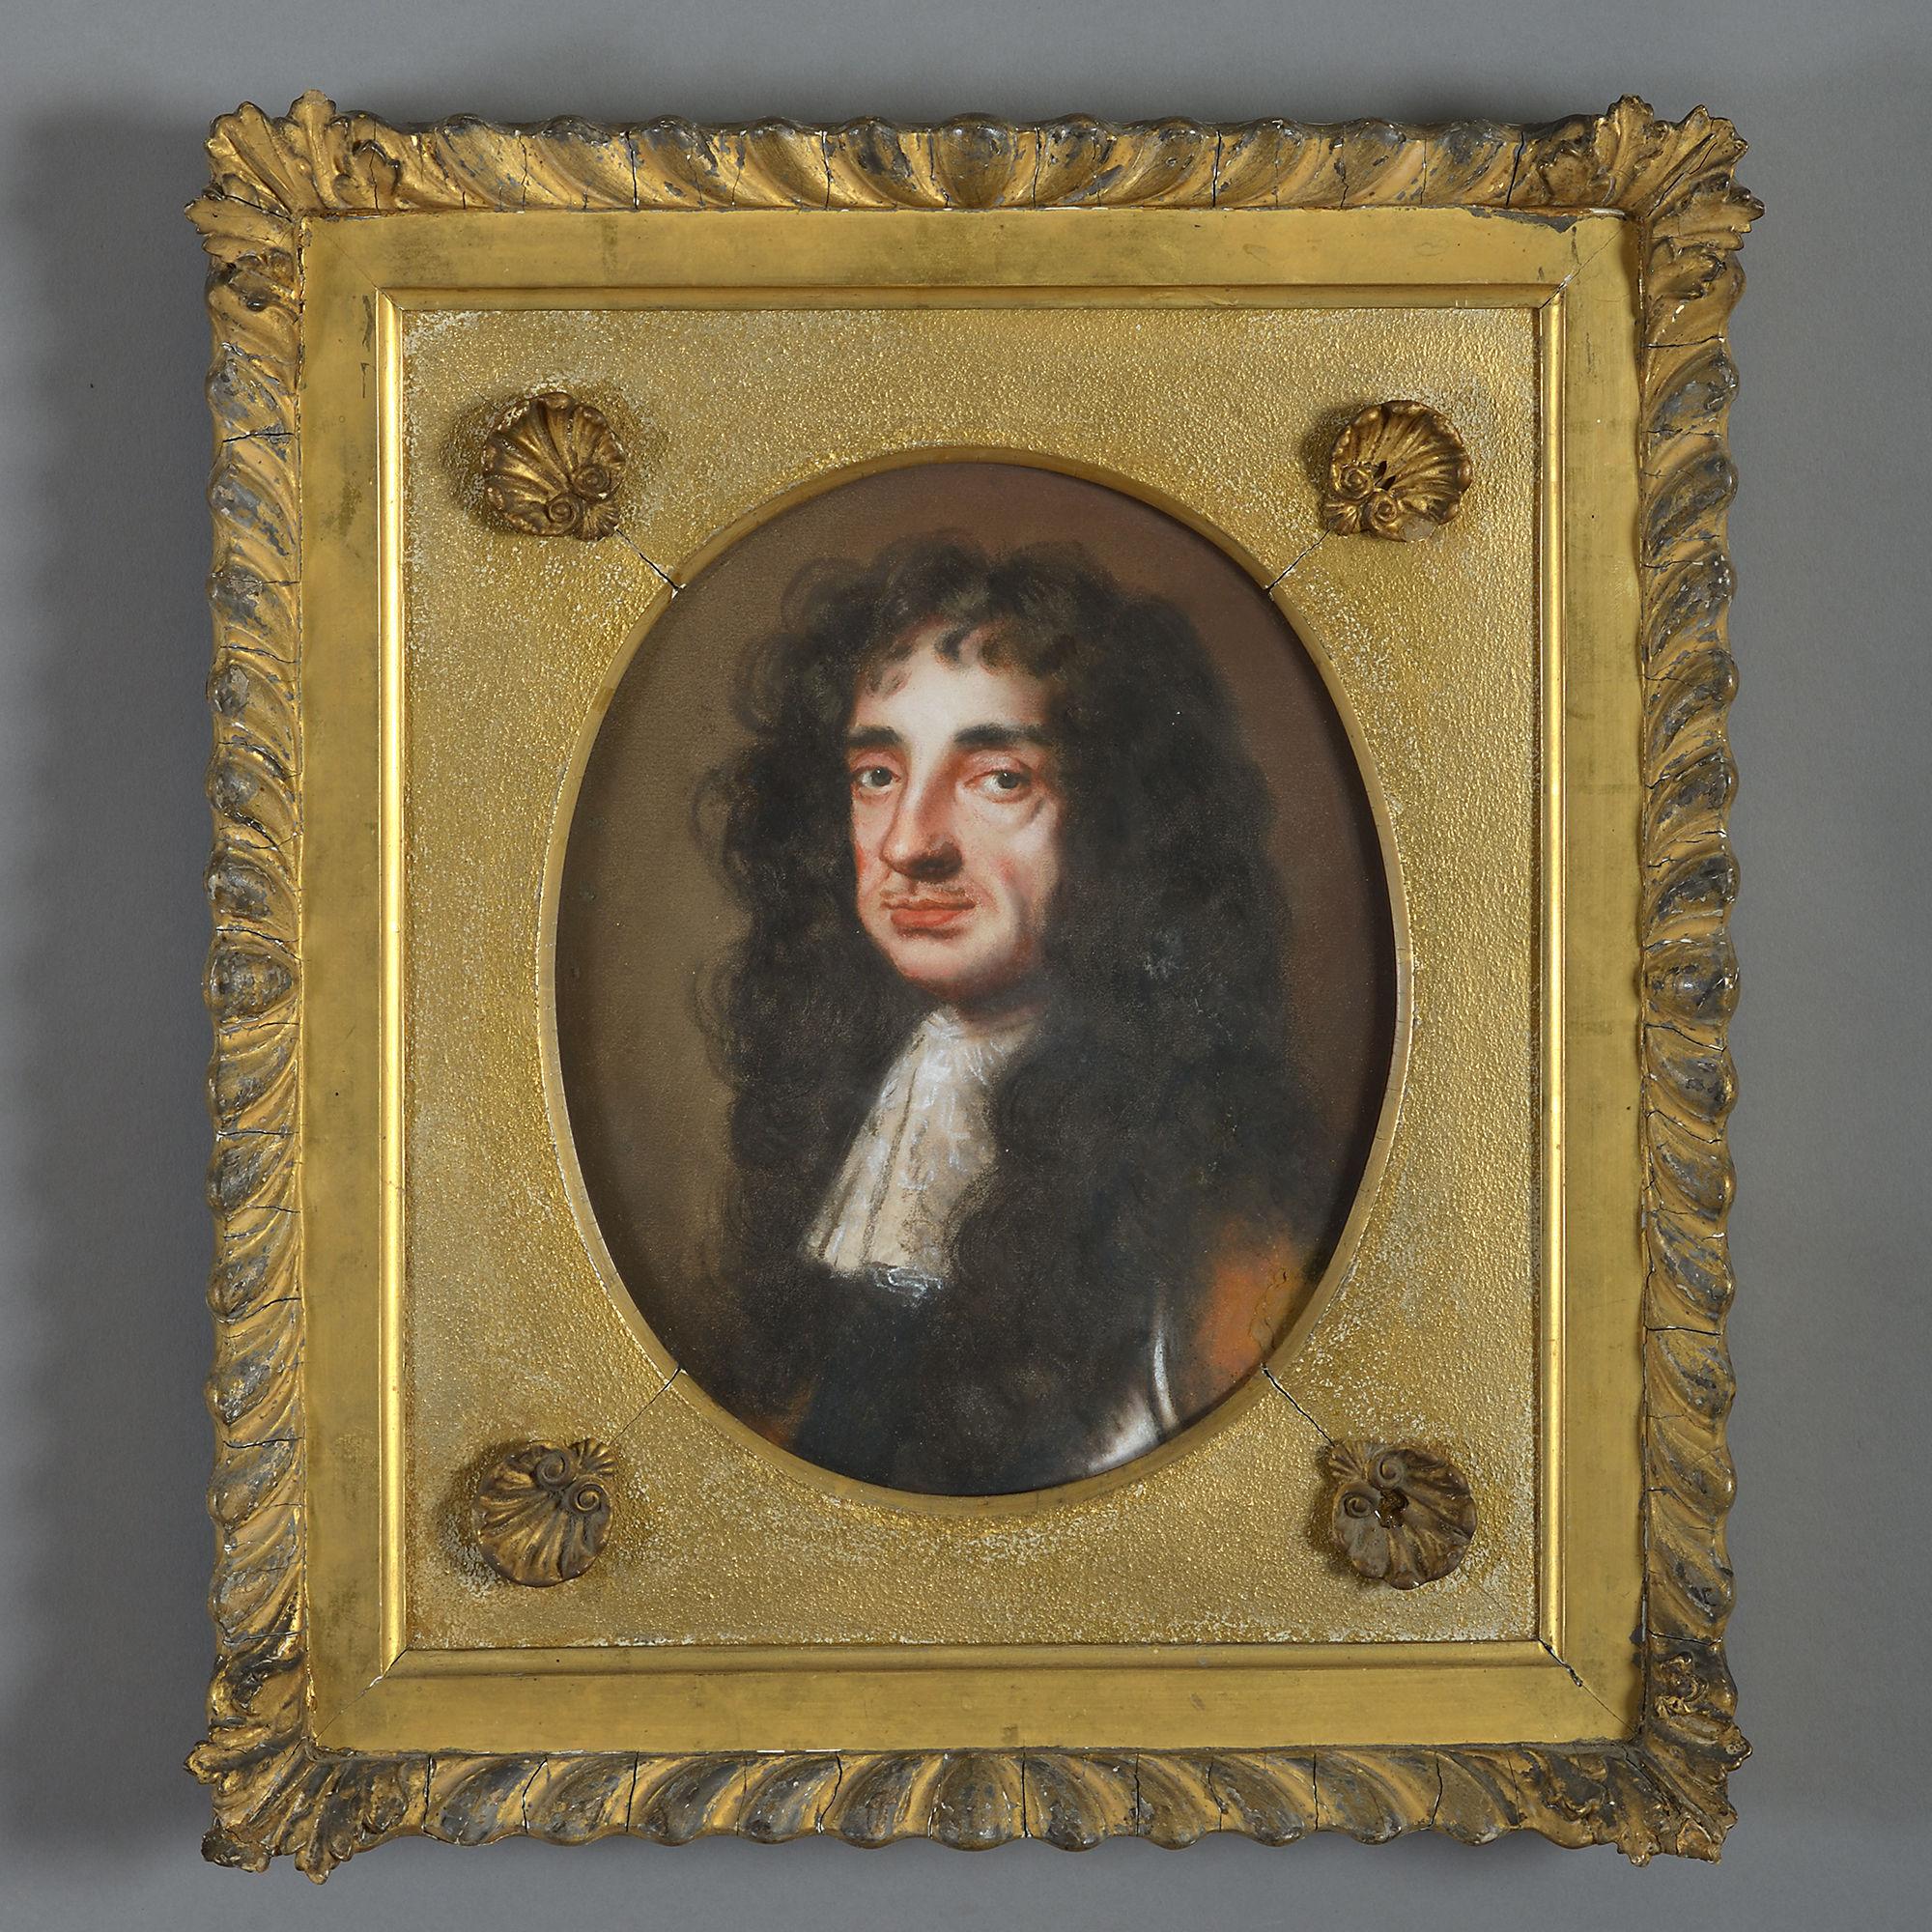 Late 17th Century Pastel Portrait of King Charles II